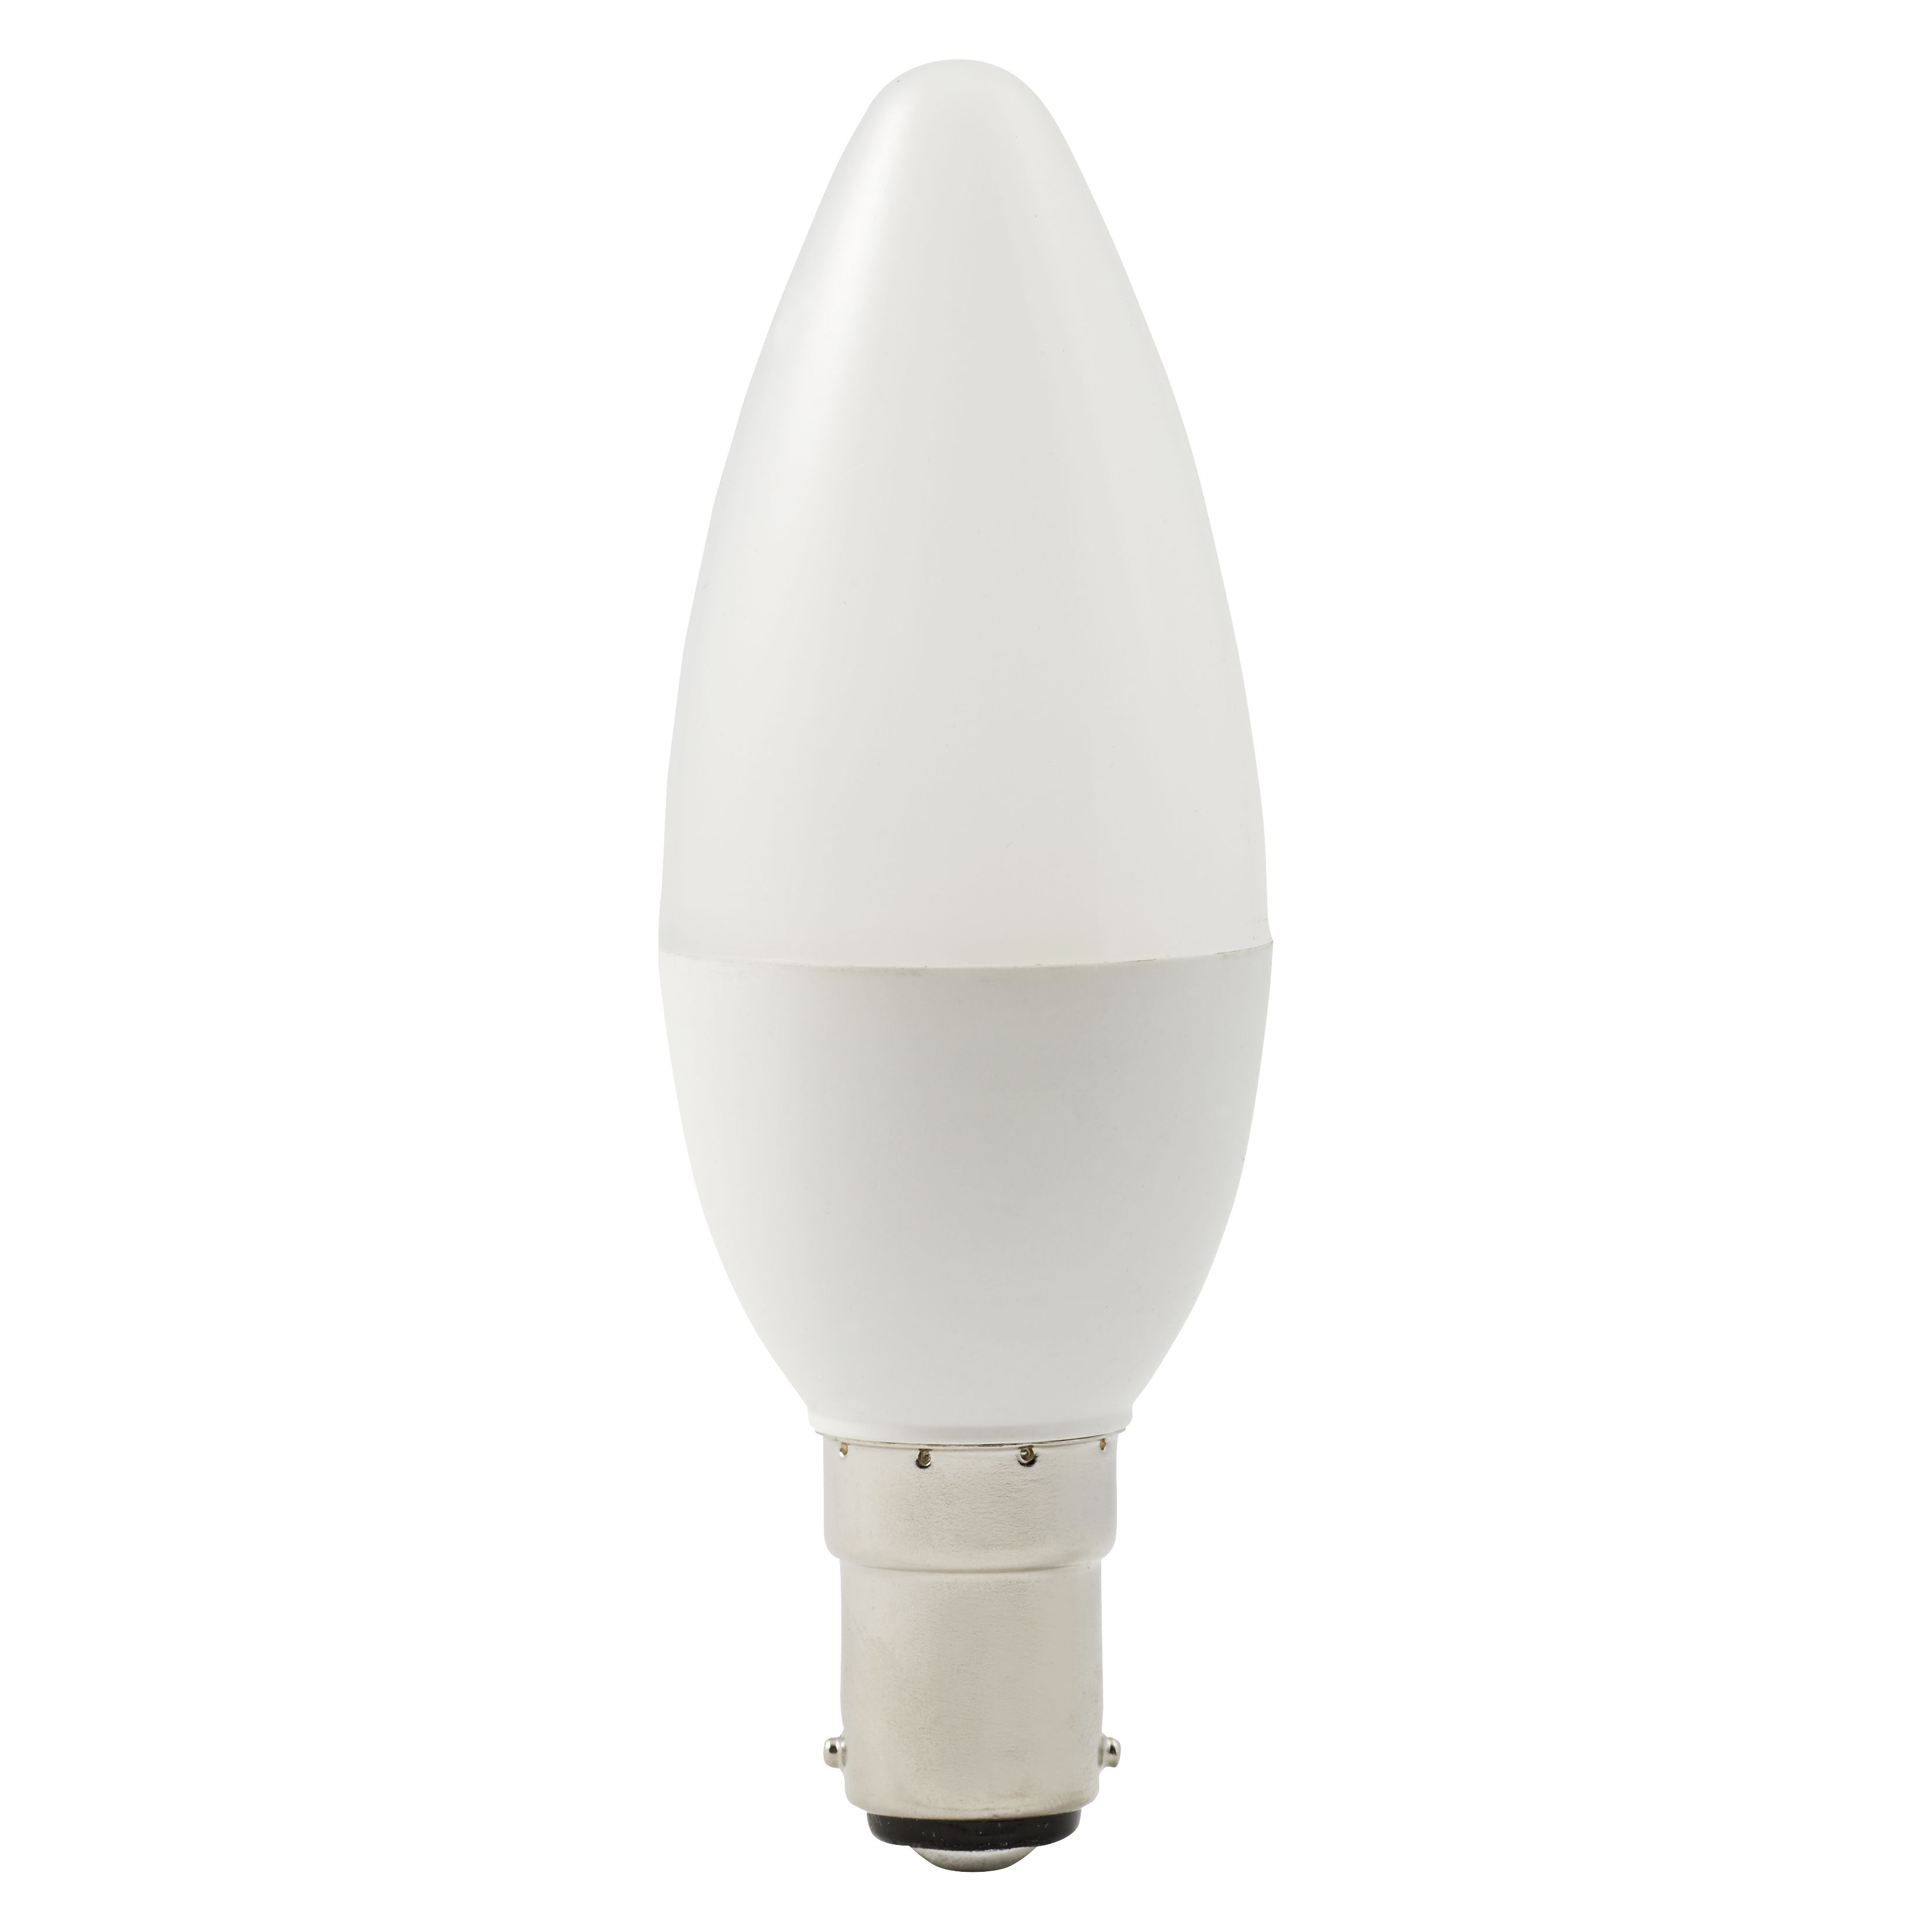 Diall B15 2.2W 250lm Frosted Candle Warm white LED Light bulb